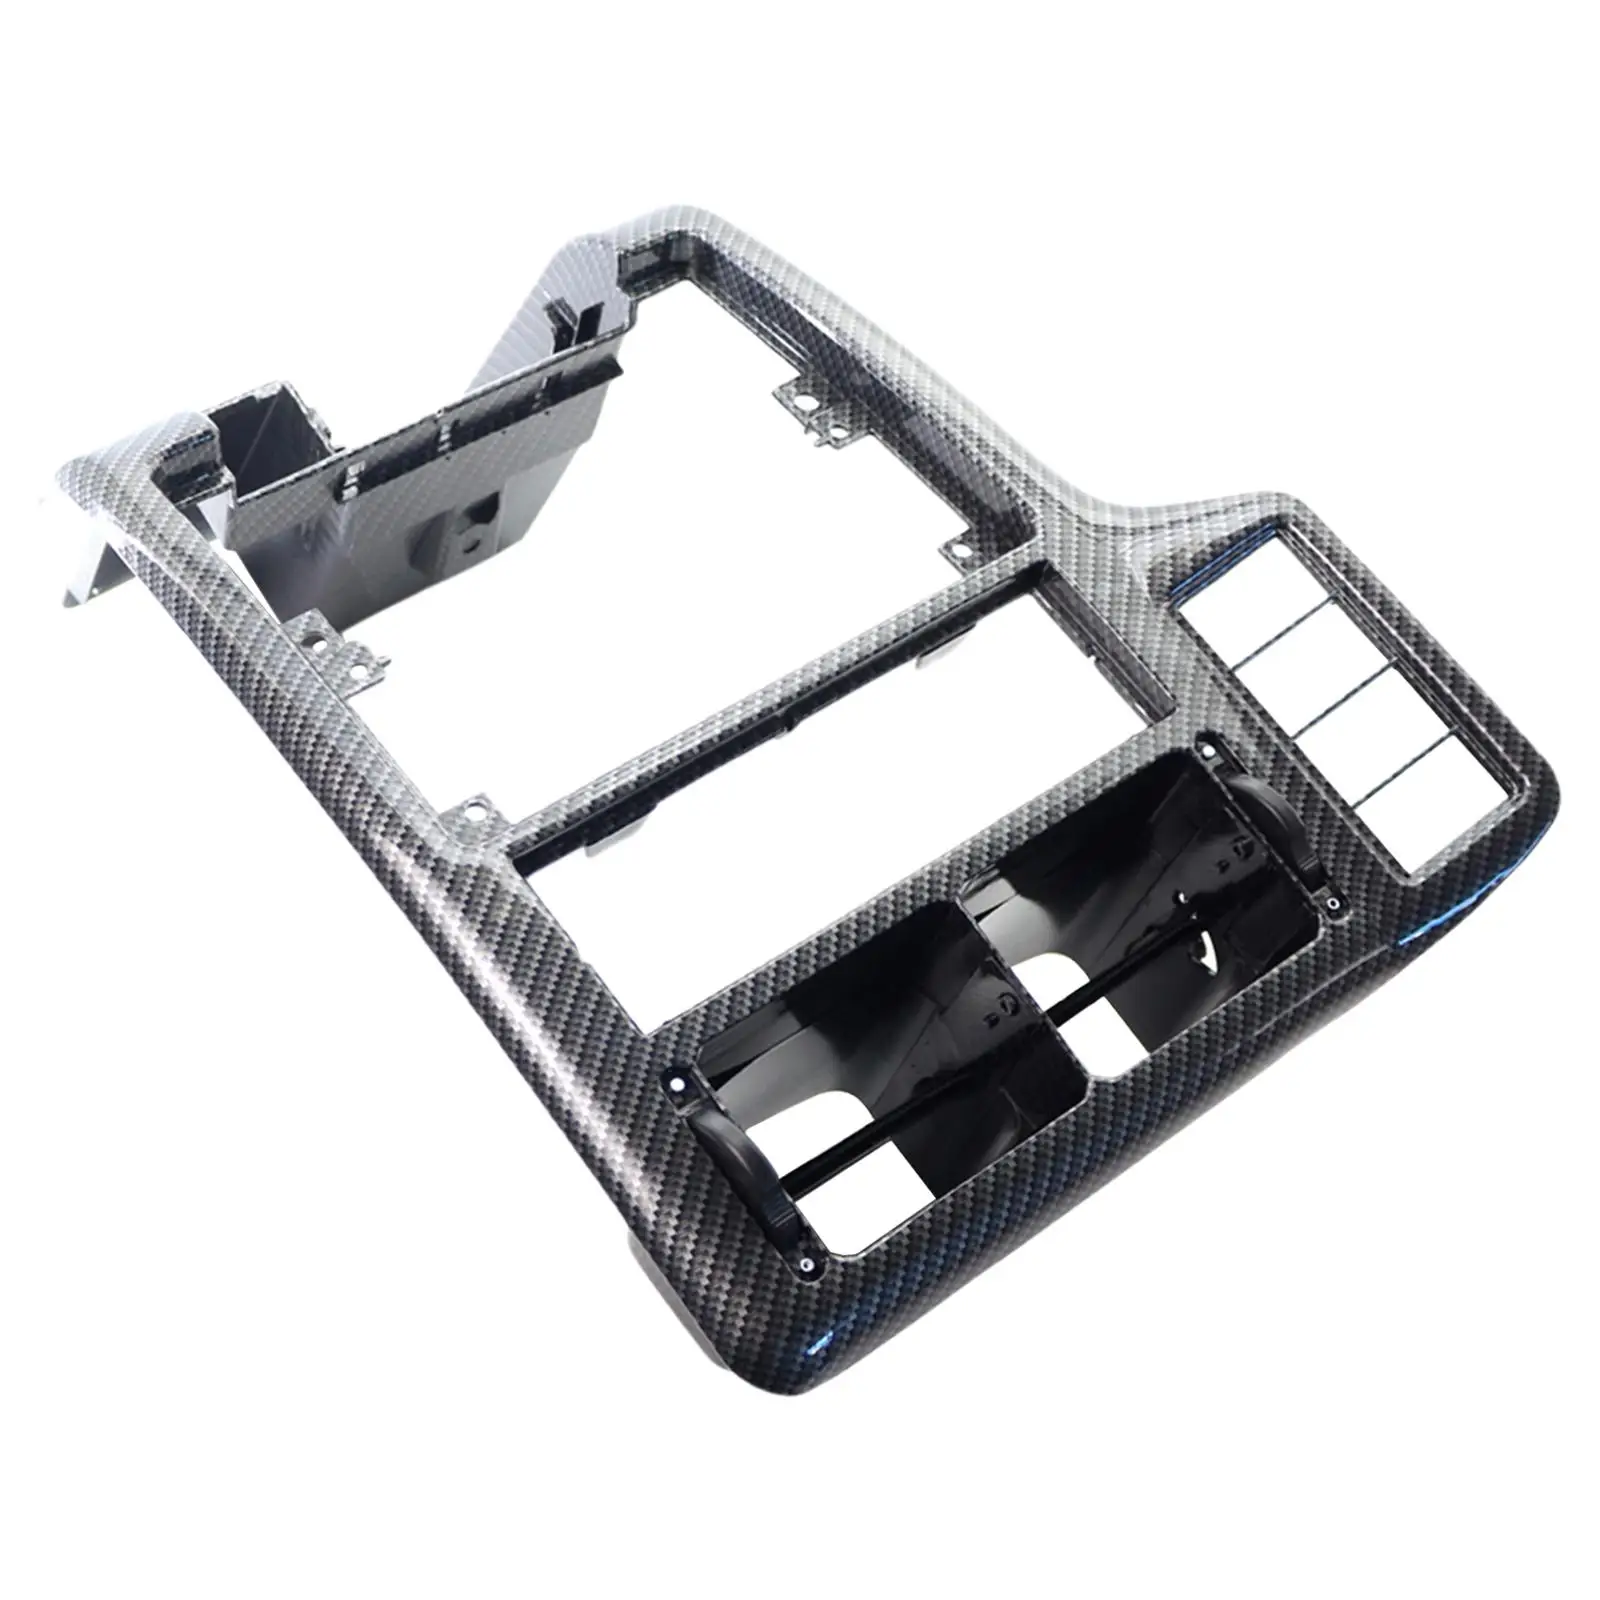 

Inner Center Console Dash AC Air Vent Grille 6N1 858 071A 6N1 858 071 A Trim Panel Front Automotive Fit for VW 94-97